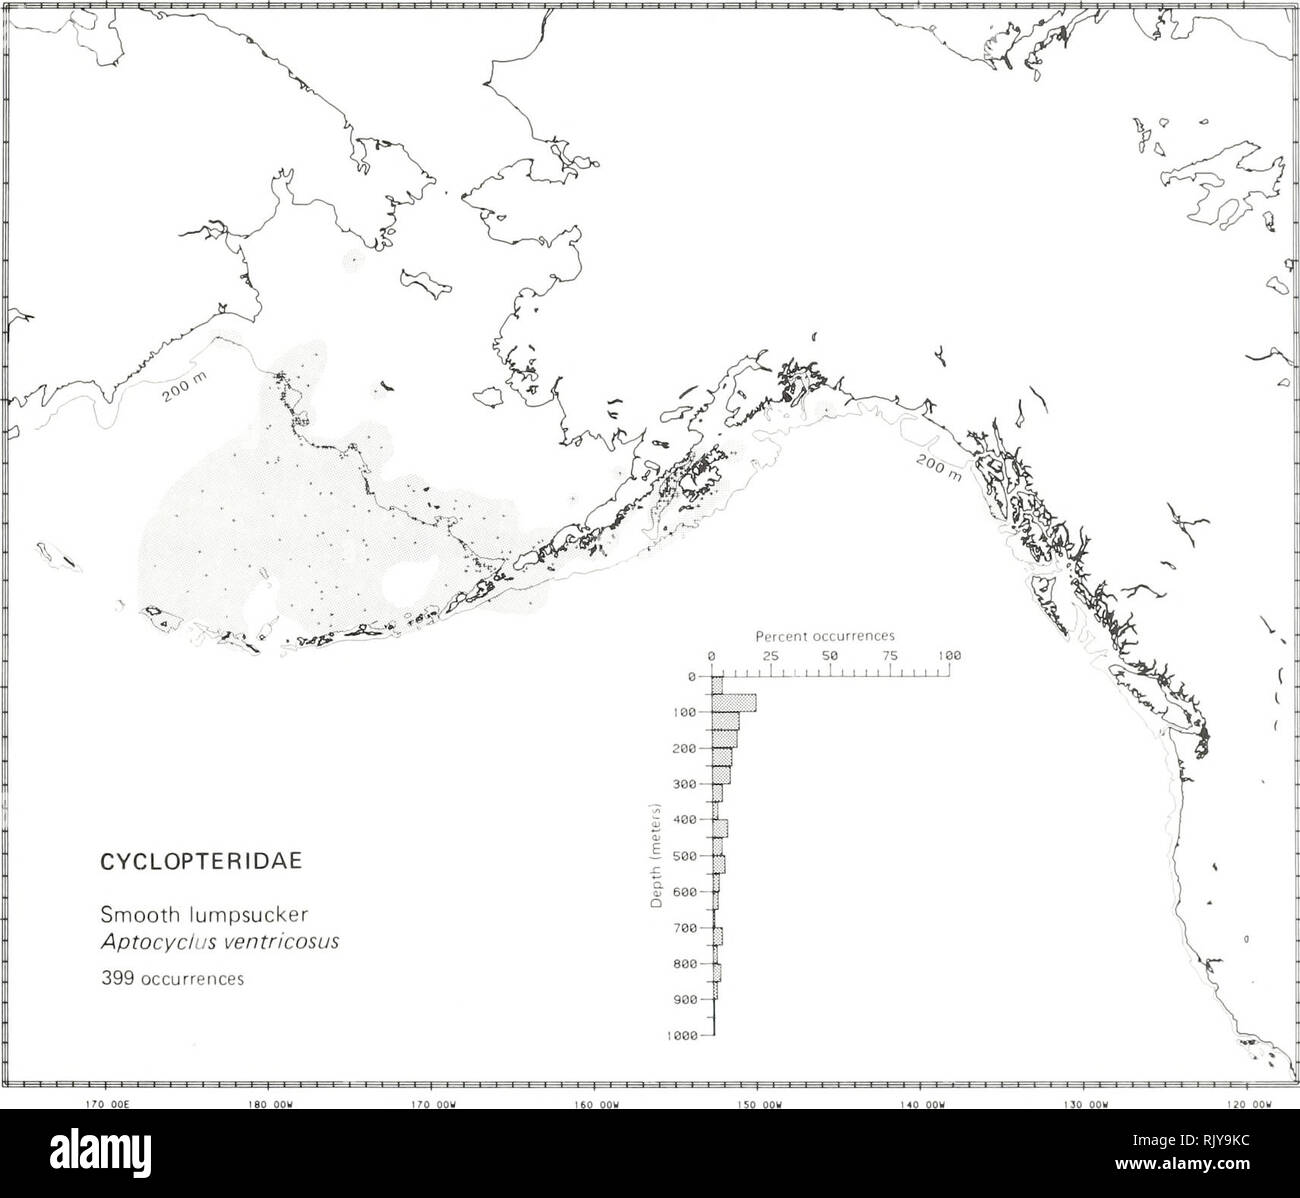 . Atlas and zoogeography of common fishes in the Bering Sea and Northeastern Pacific / M. James Allen, Gary B. Smith. Fishes Bering Sea Geographical distribution.. SMOOTH LUMPSUCKER, Aptocyclus ventricosus (Pallas 1769) Cyclopteridae: Lumpfishes and Snailfishes Literature Reported from Pusan, South Korea, to the Anadyr Gulf in the Bering Sea (outside the Sea of Okhotsk), throughout the Com- mander and Aleutian Islands, and southeast to Mathieson Channel, British Columbia (Shmidt 1950; Wilimovsky 1964; Ueno 1970; Quast and Hall 1972; Hart 1973), at depths of 0 to 1500 m (Fedorov 1973a). Survey  Stock Photo